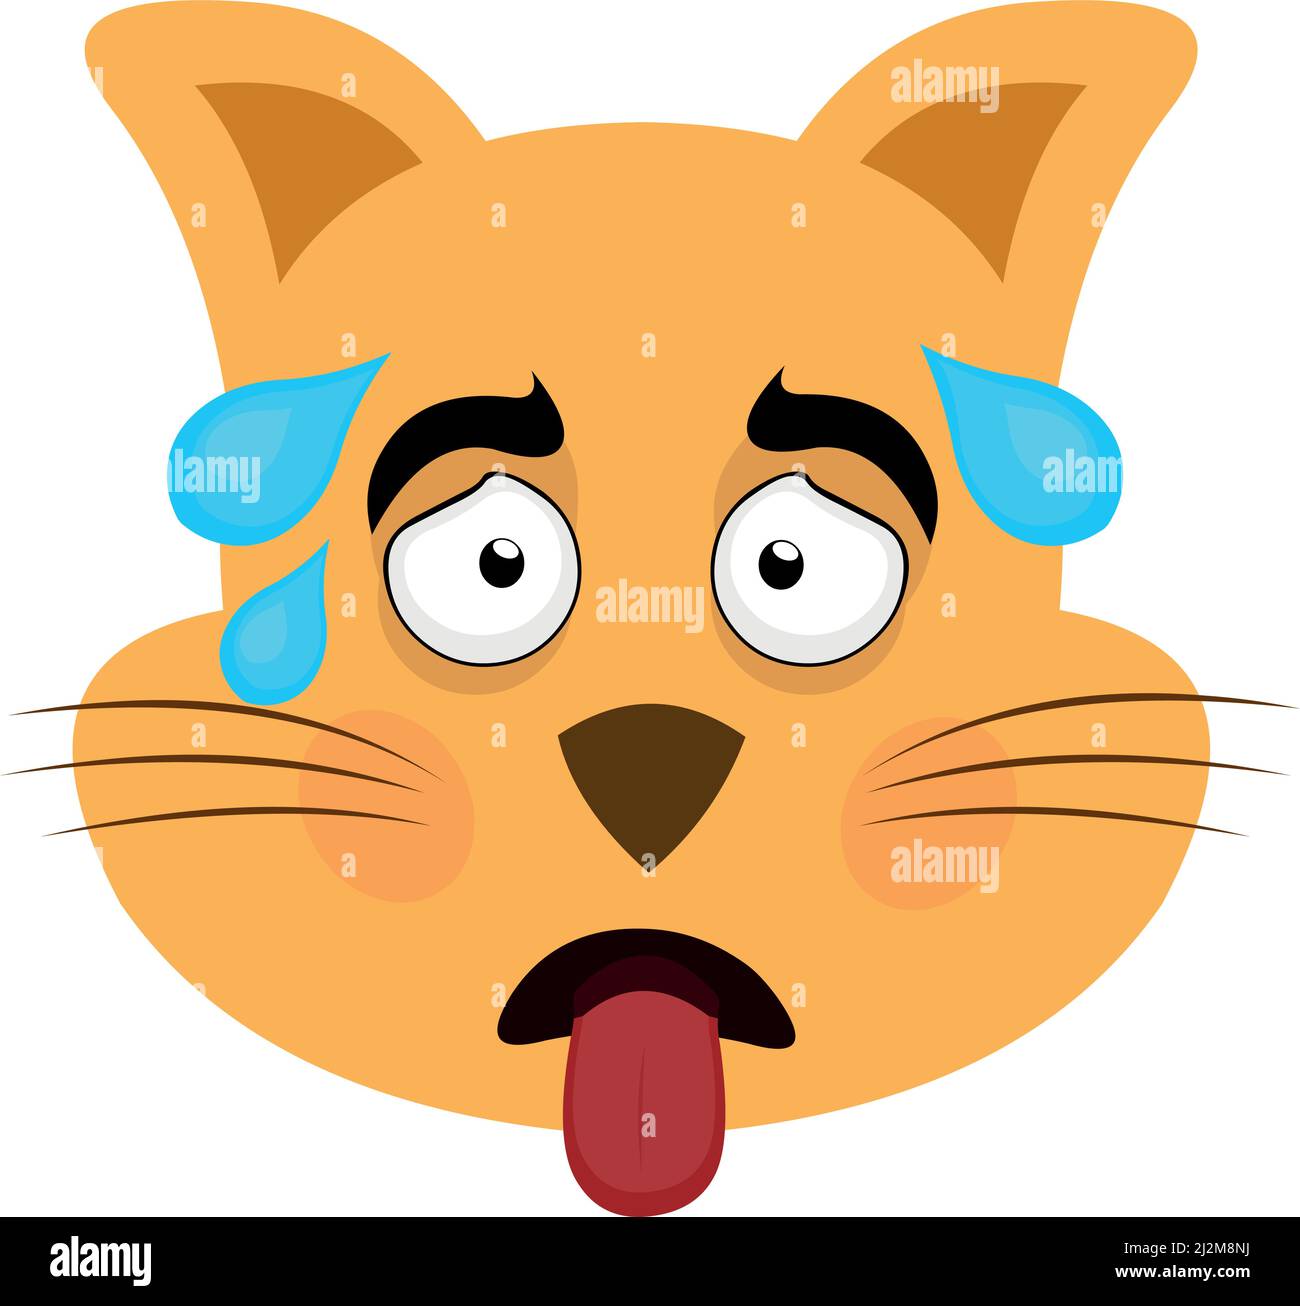 vector illustration of the face of a cartoon cat with an angry